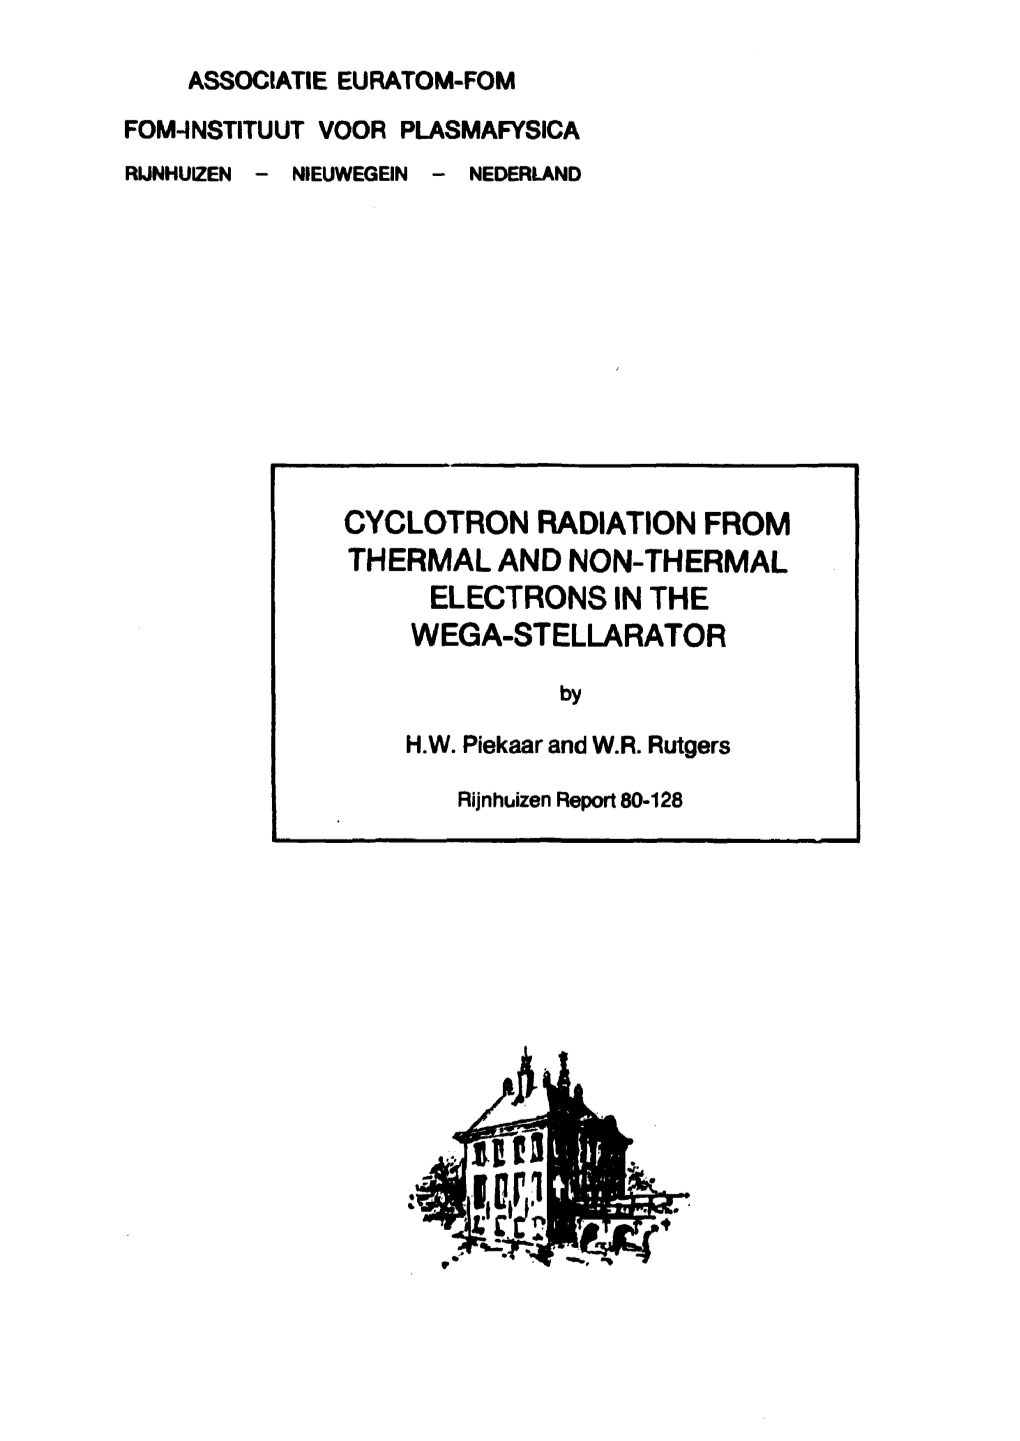 Cyclotron Radiation from Thermal and Non-Thermal Electrons in the Wega-Stellarator